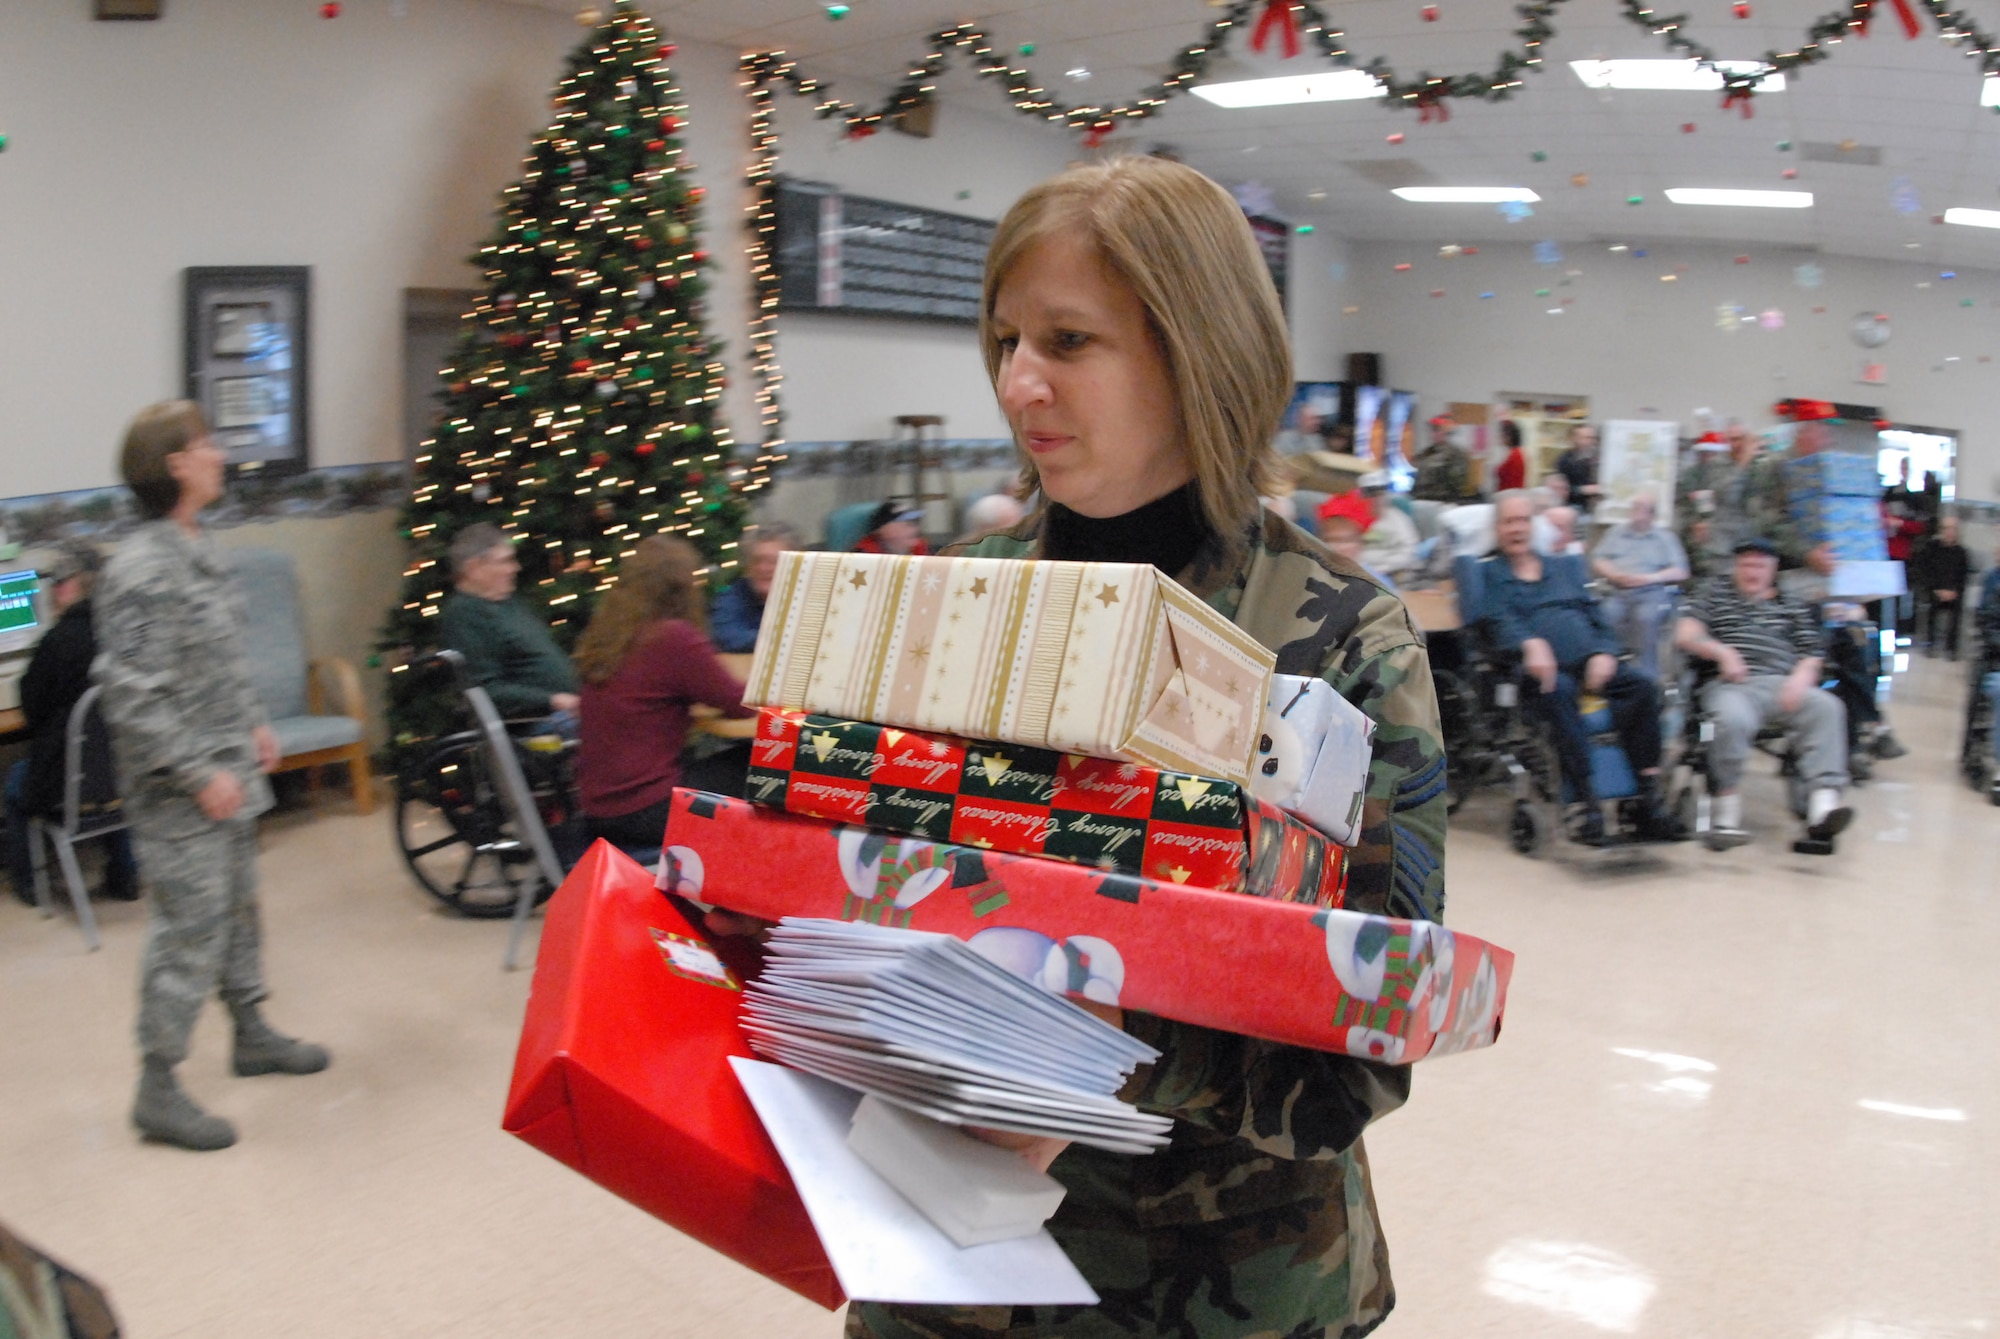 Senior Master Sgt. Sandi Renville carries Christmas gifts at the North Dakota Veteran's Nursing Home Dec. 10 in Lisbon, N.D. The gifts are given to veterans at the nursing home by the North Dakota Air and Army National Guard each December using funds raised through personal donations given by the North Dakota National Guard members. Sergeant Renville is assigned to the 119th Wing. (U.S. Air Force photo/Senior Master Sgt. David H. Lipp) 